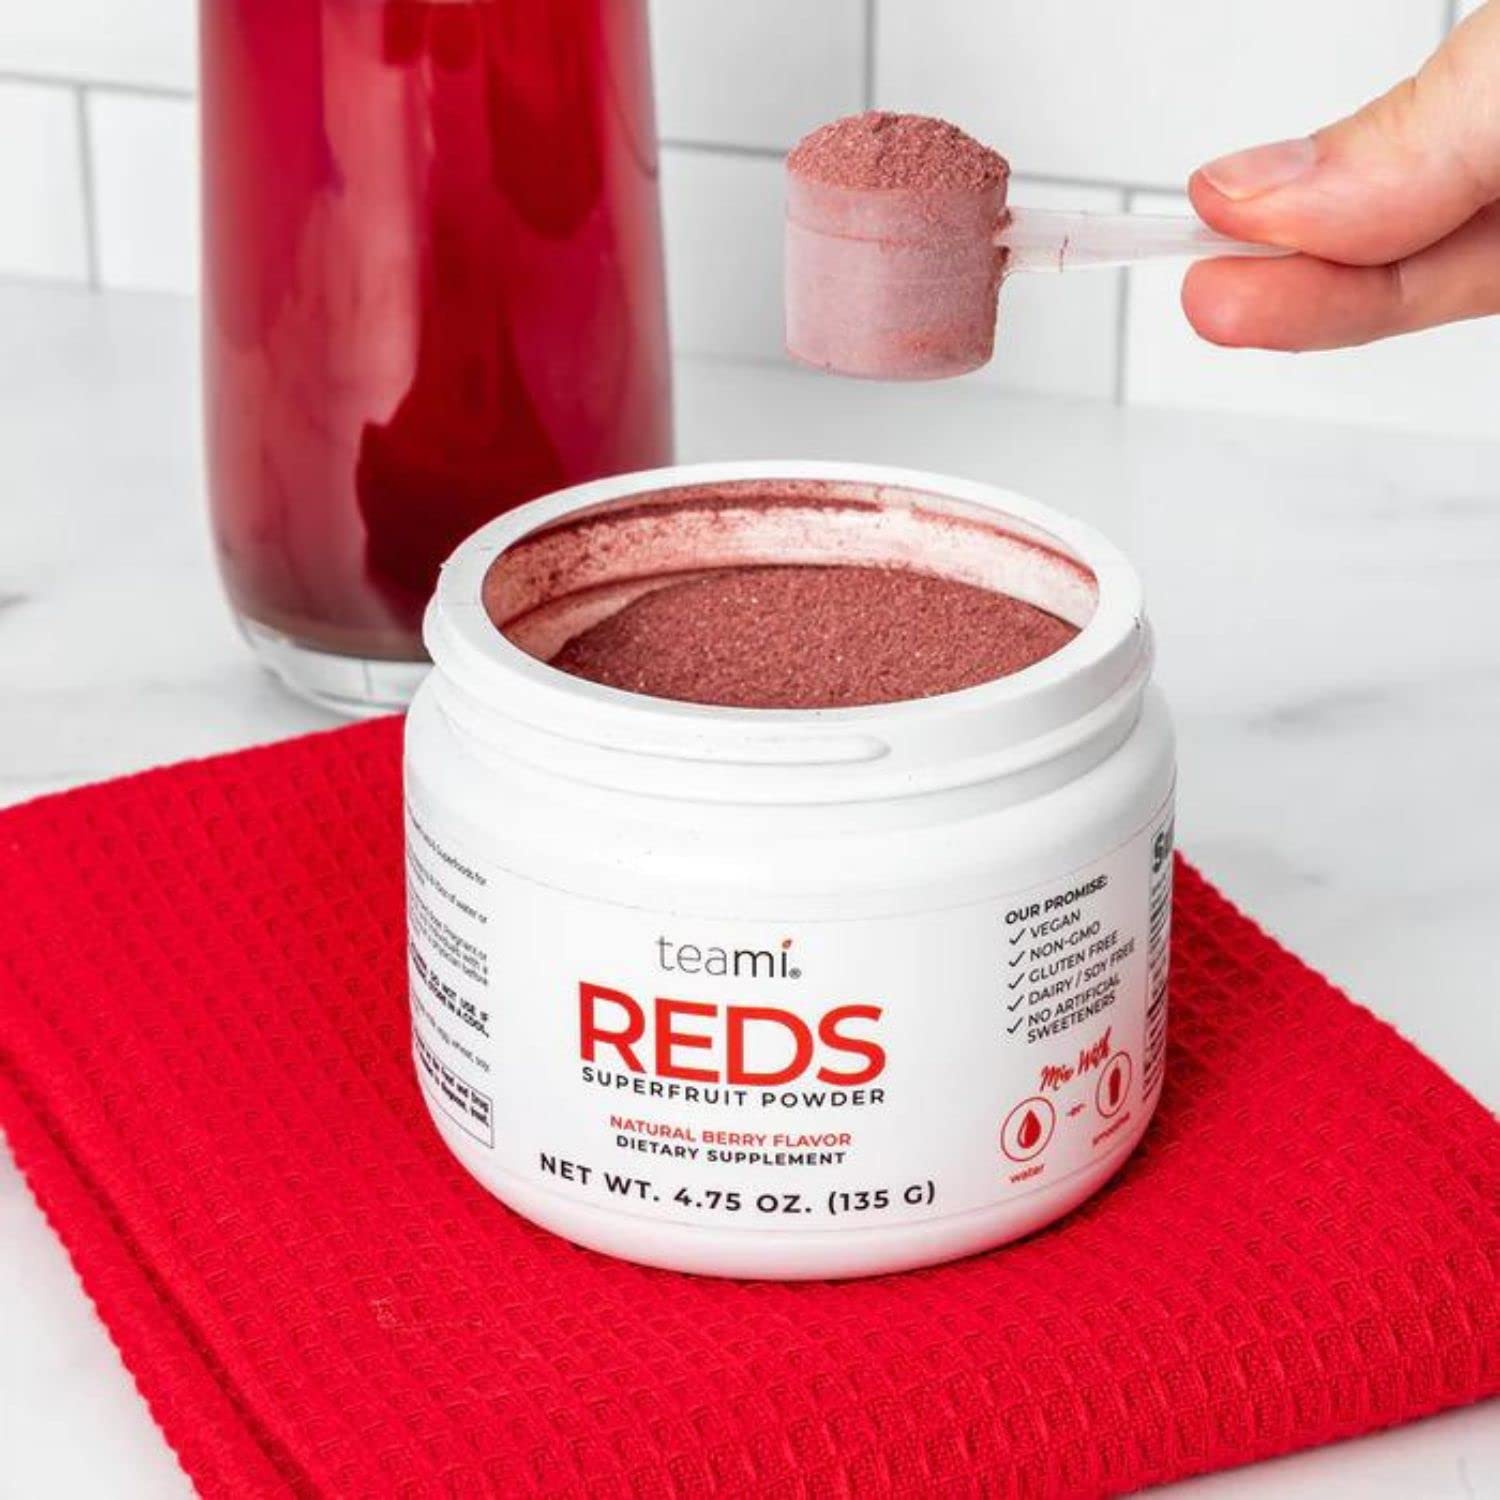 Teami Reds Superfruit Powder - Delicious Energy Elixir Bursting with Fruit Extracts - 30 Servings